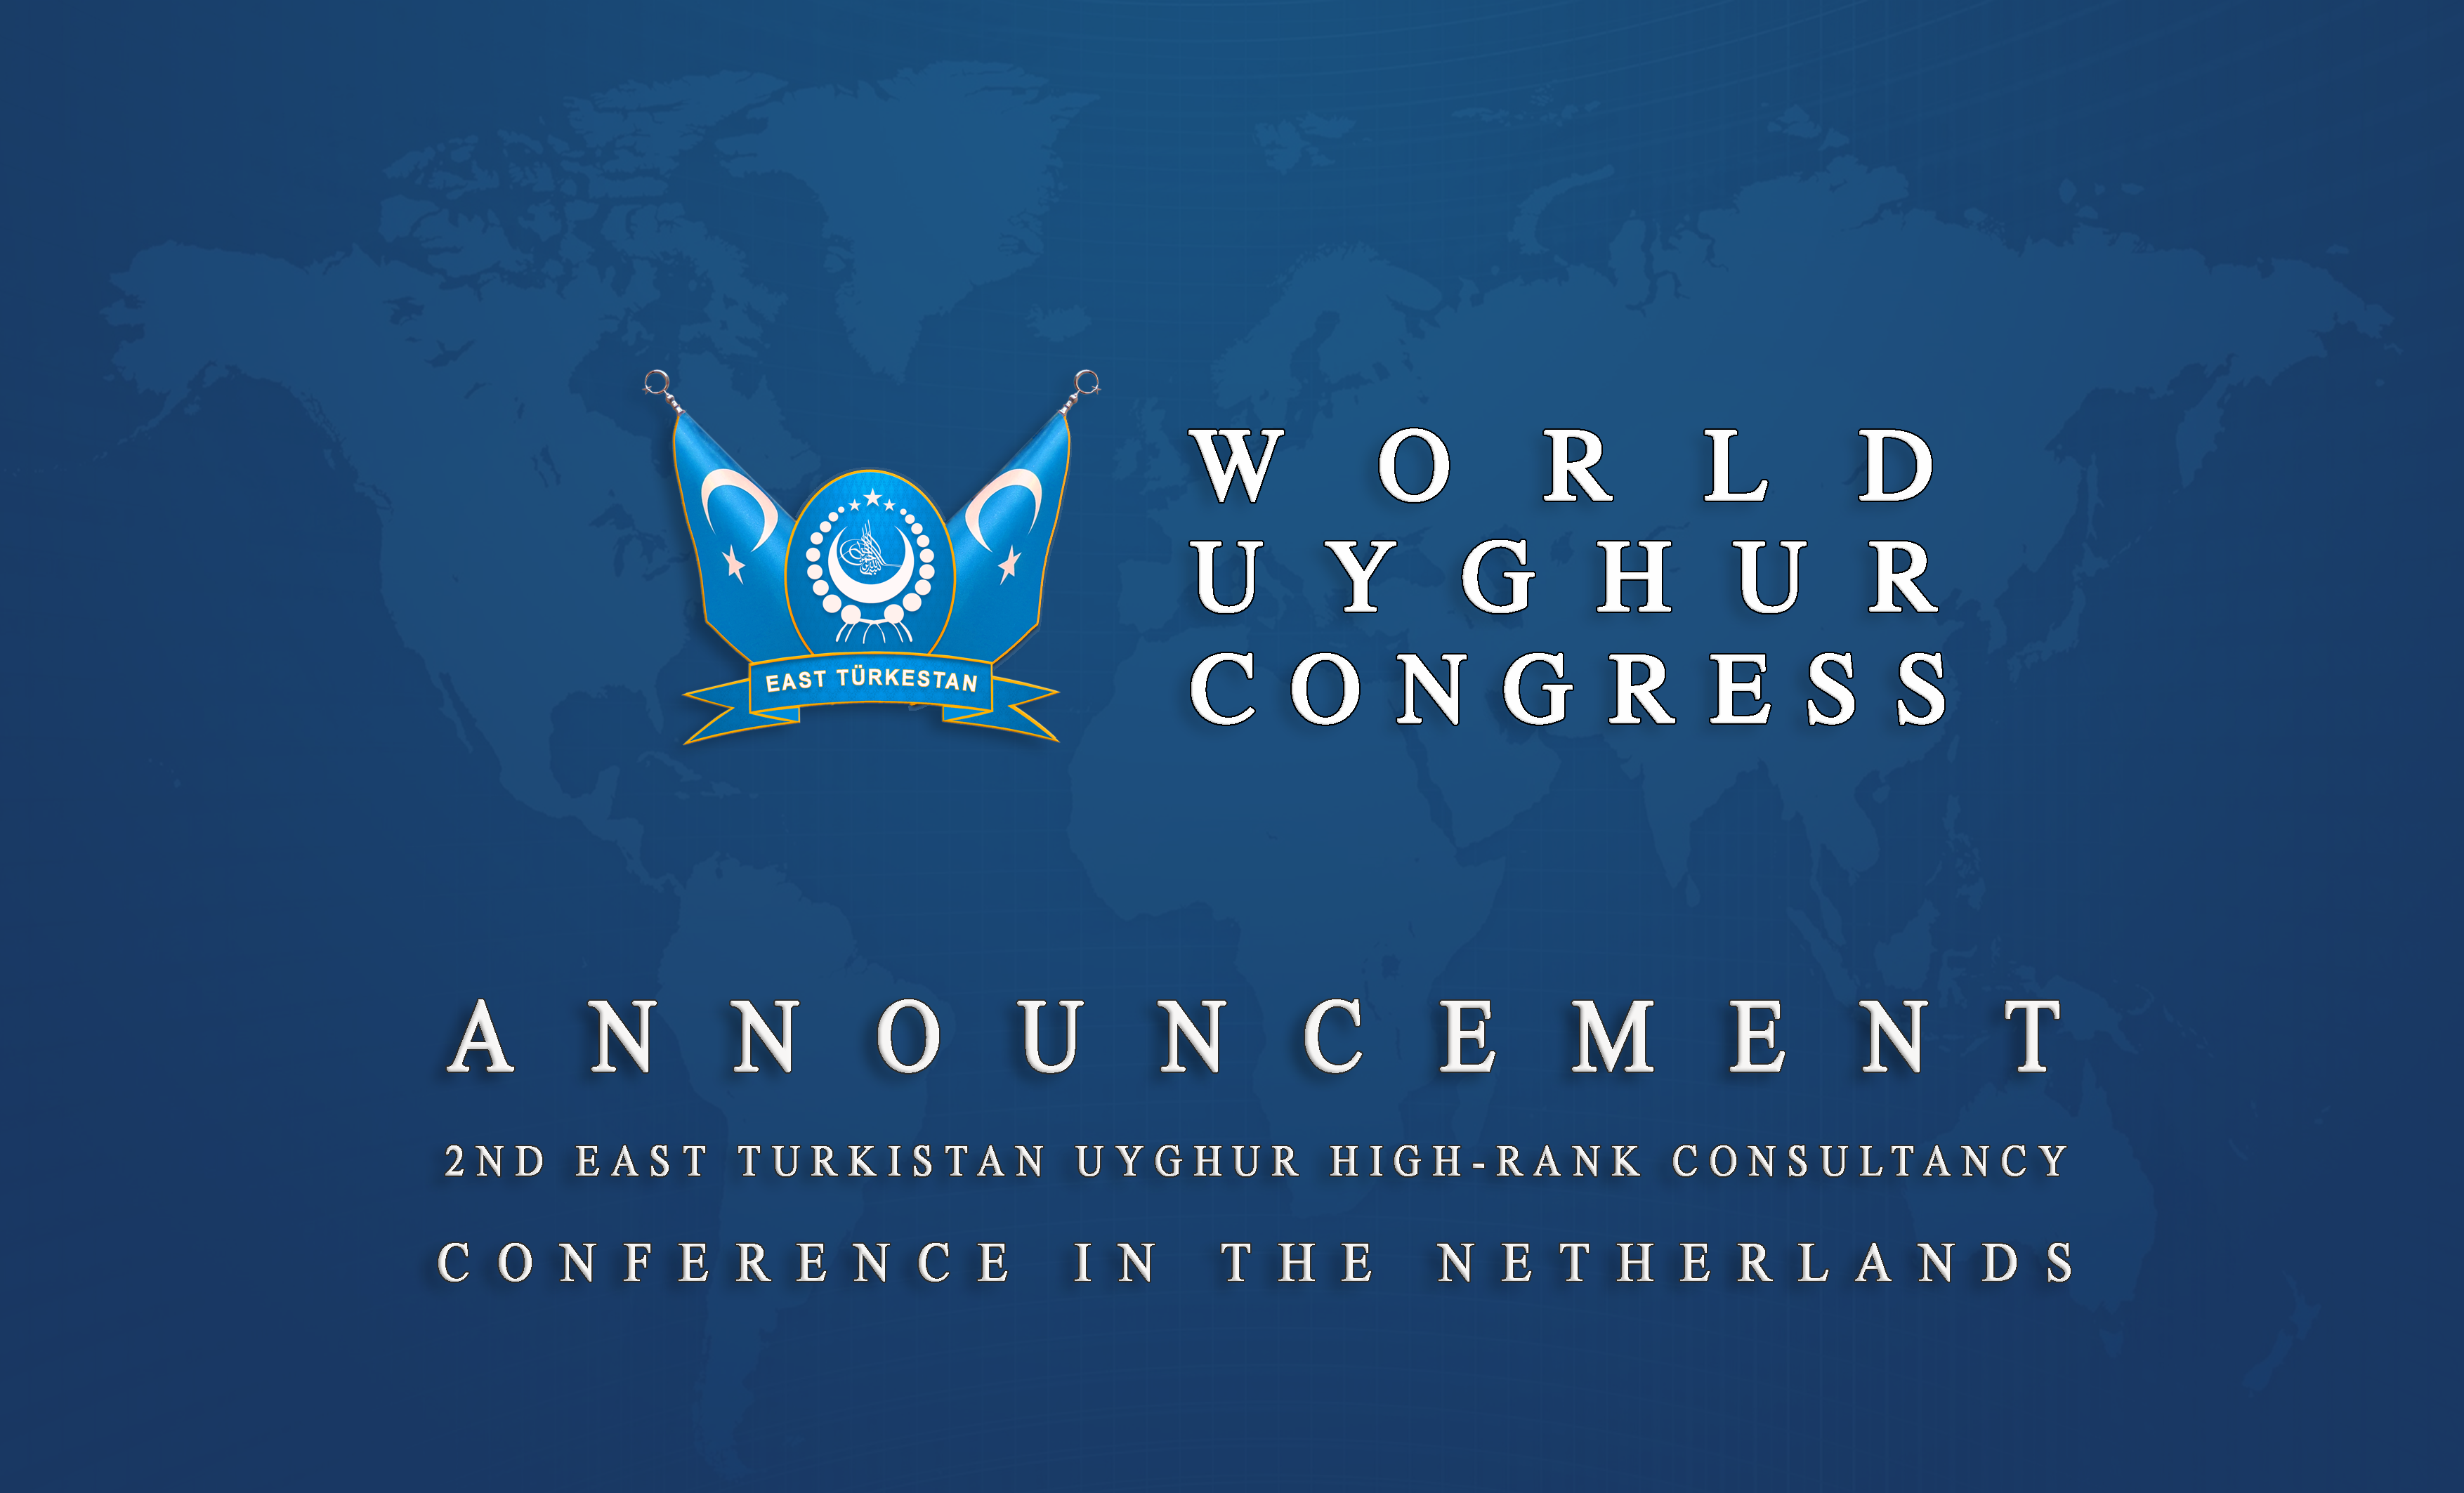 The Second East Turkistan Uyghur High-Rank Consultancy” Conference in The Netherlands